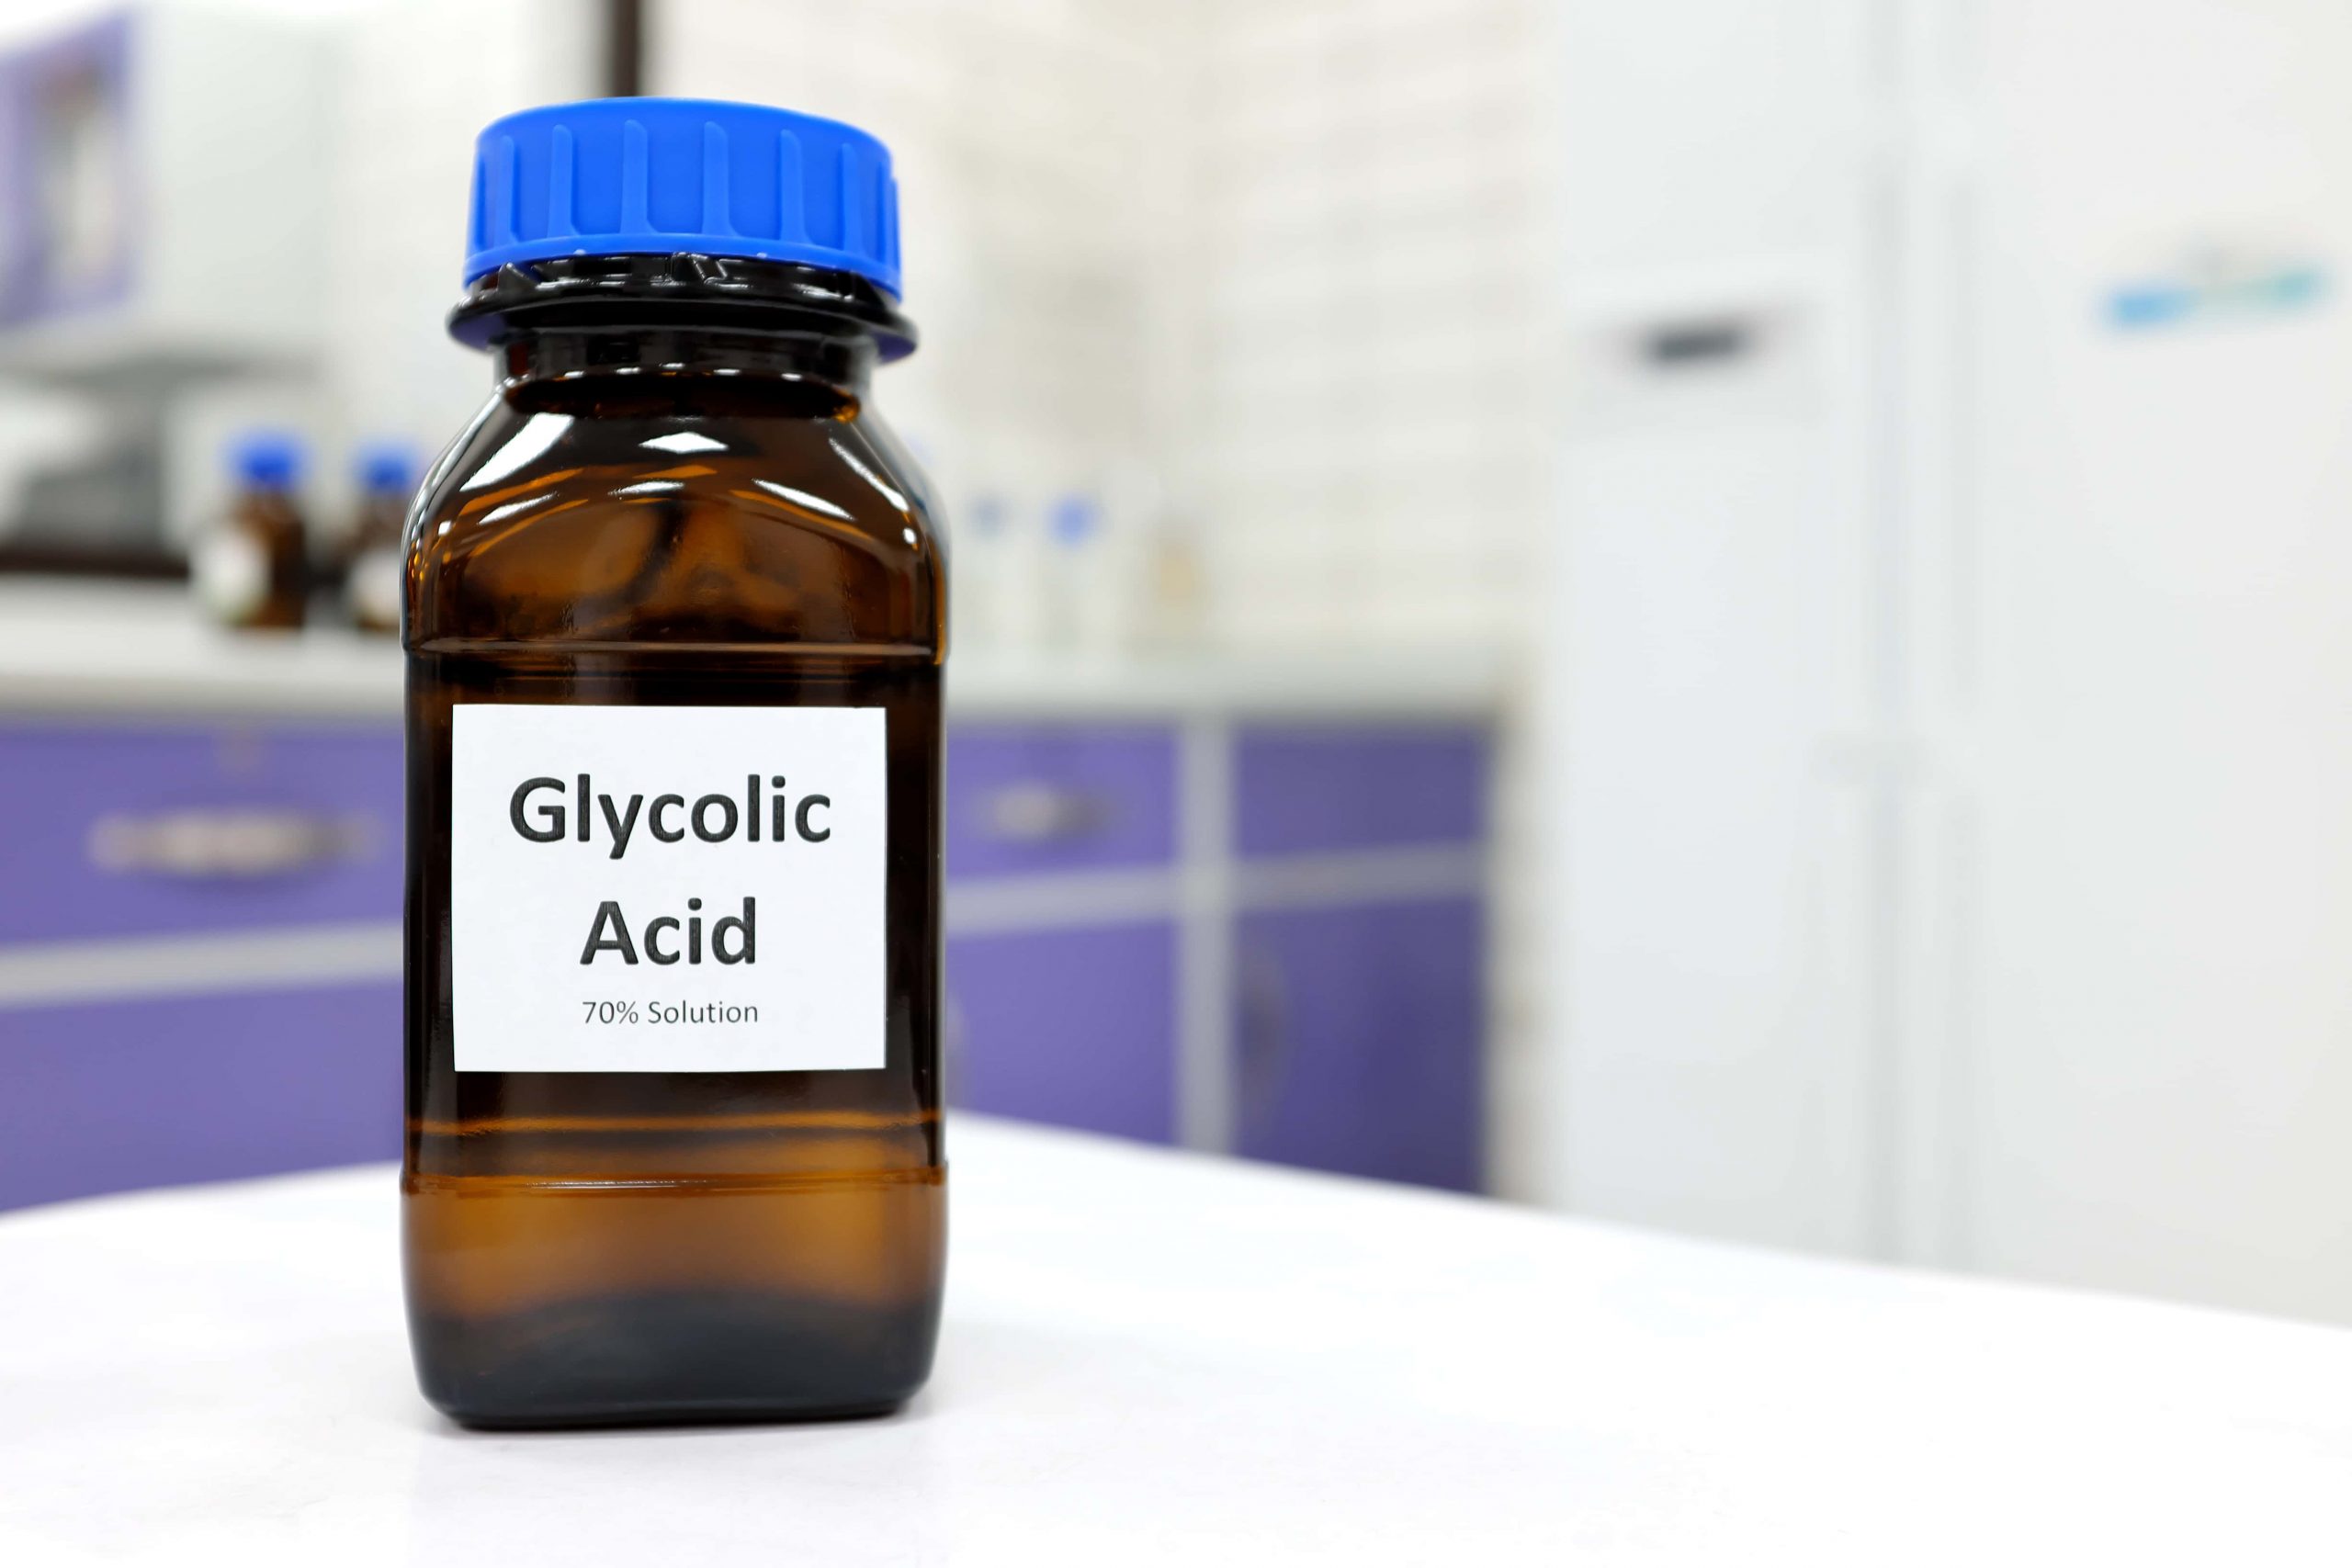 Glycolic Acid For Acne Scars